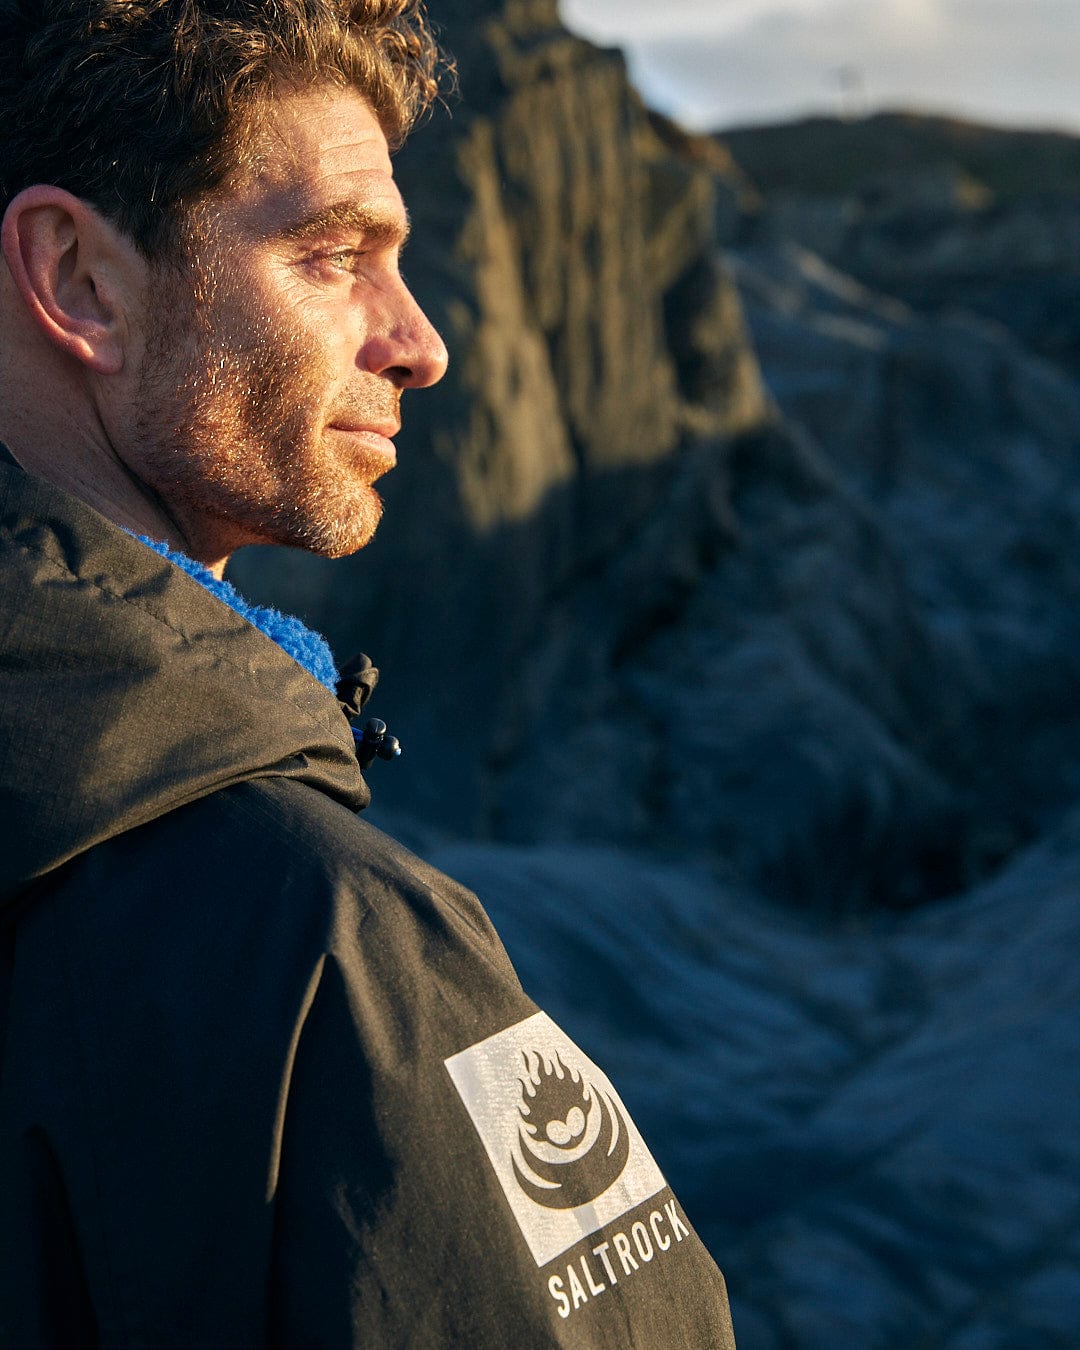 An outdoor enthusiast wearing a Saltrock Four Seasons - Waterproof Changing Robe - Black/Blue, standing confidently in front of a cliff.